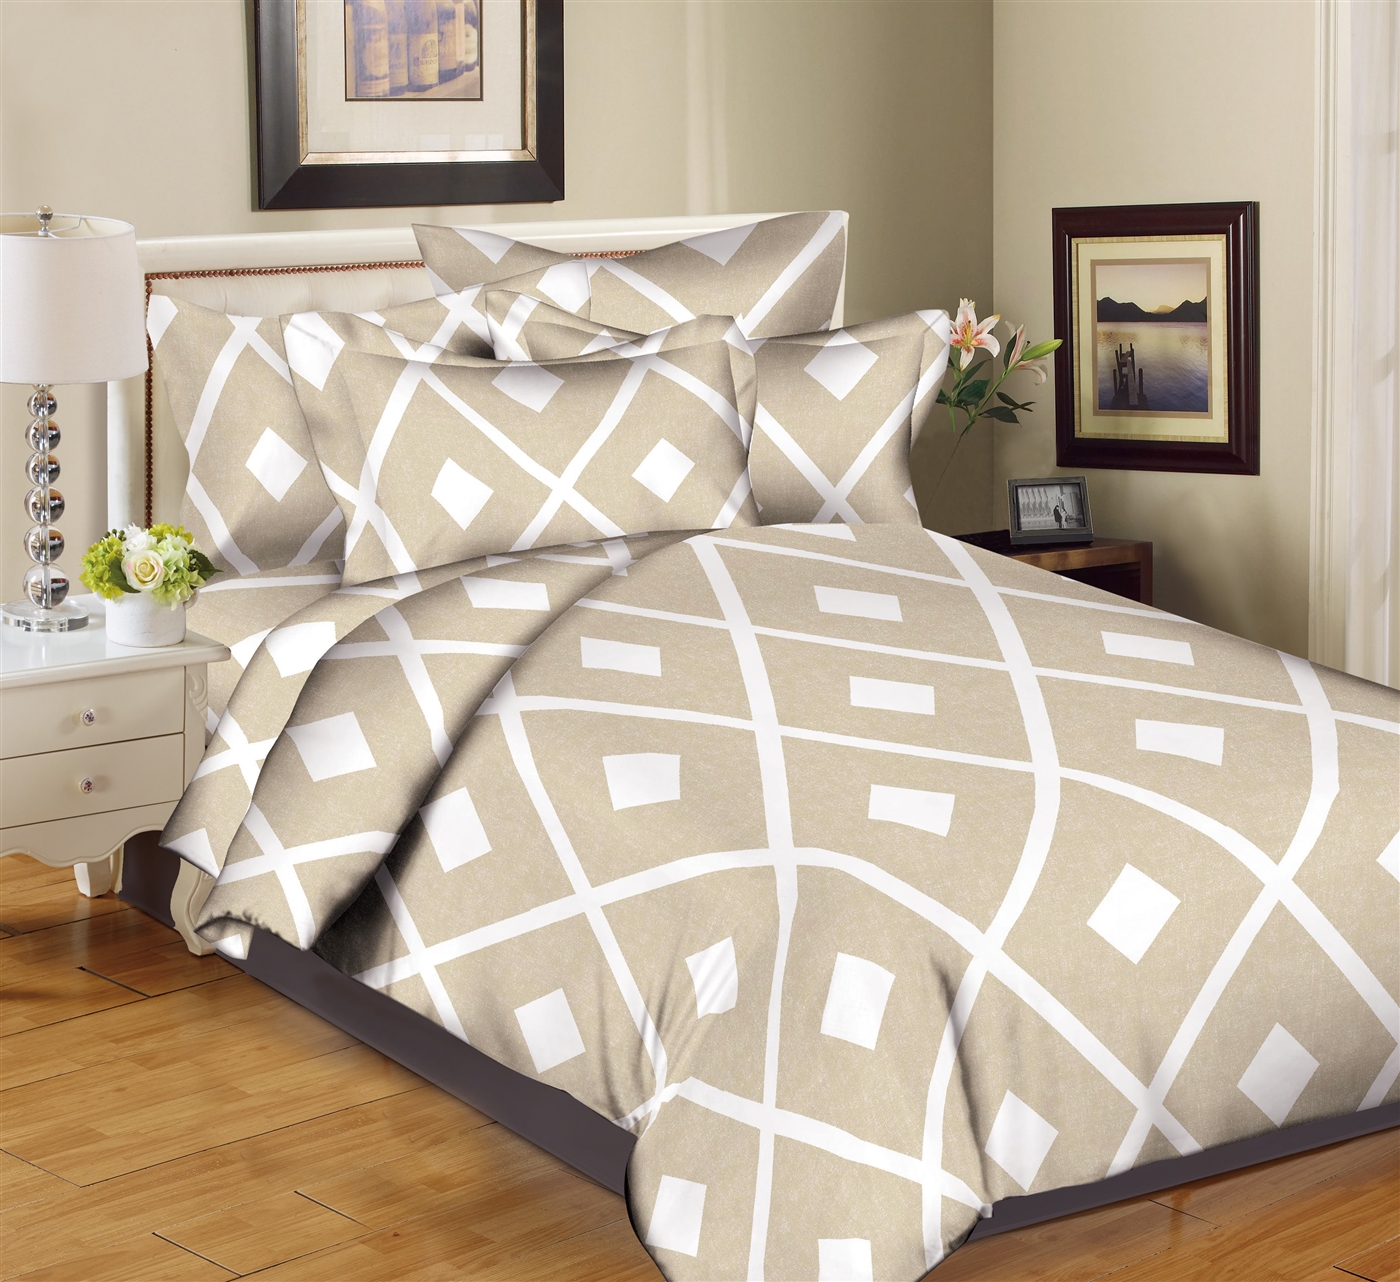 Better Bed Collection: Diagonal Diamonds Taupe 8PC Bedding Sets - 200 Thread Count